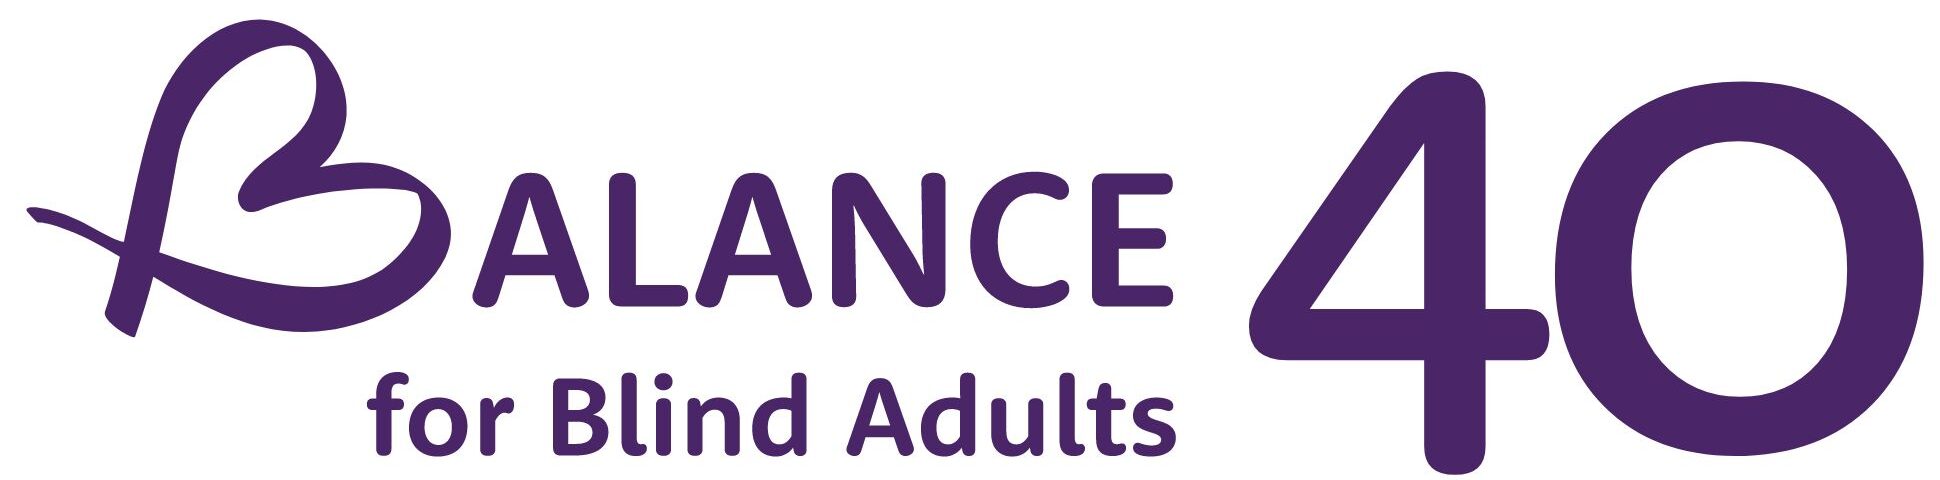 Donate Now! BALANCE for Blind Adults is 40